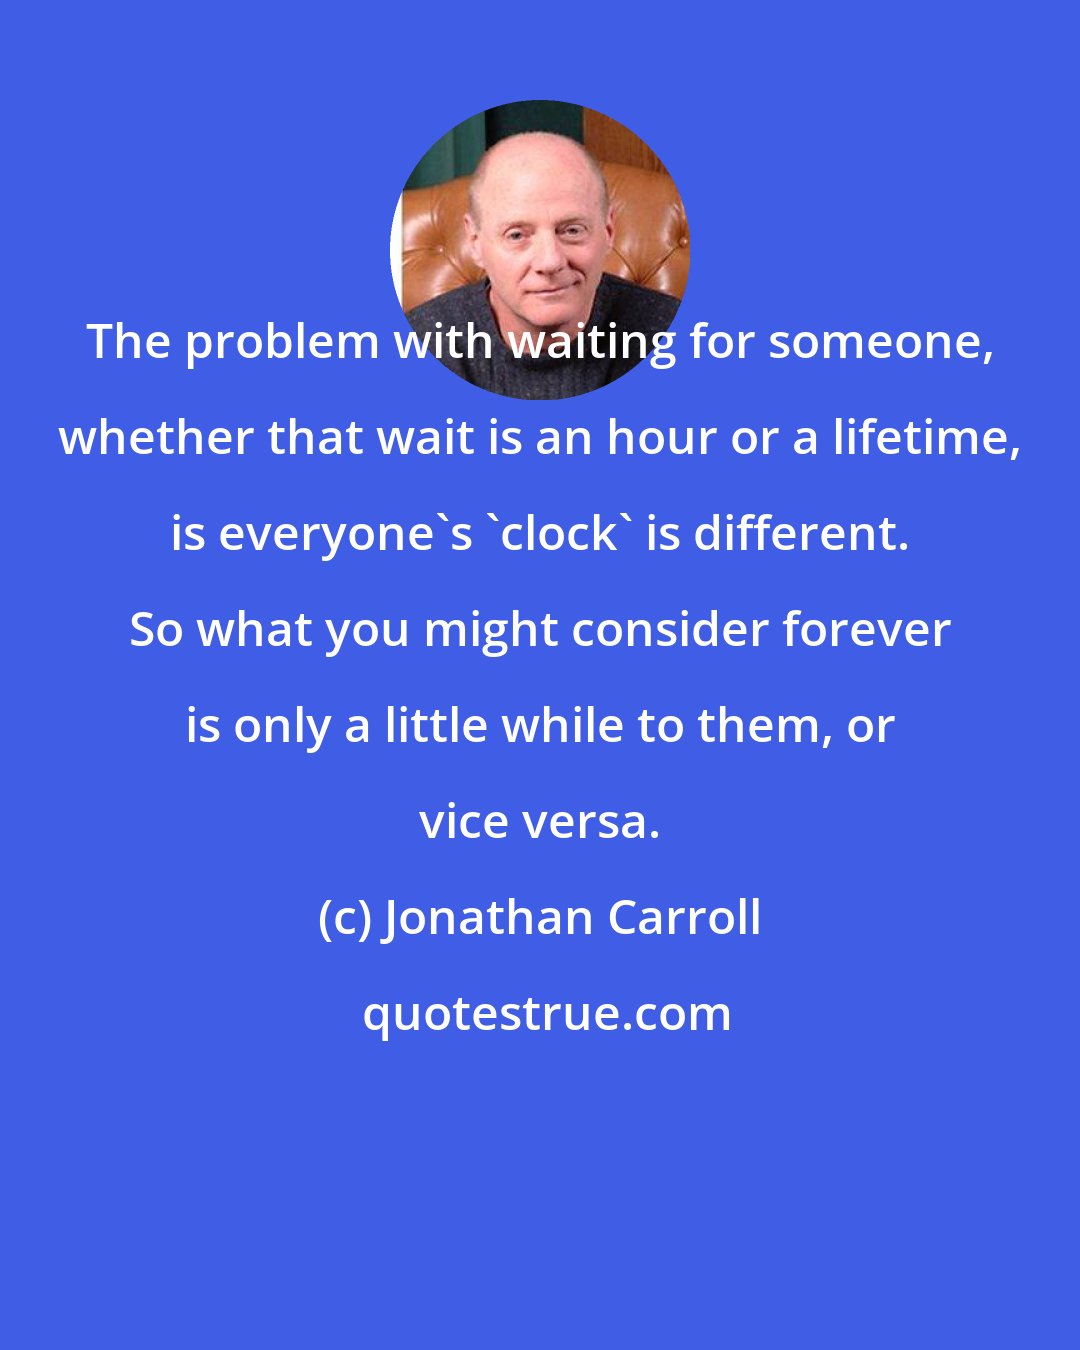 Jonathan Carroll: The problem with waiting for someone, whether that wait is an hour or a lifetime, is everyone's 'clock' is different. So what you might consider forever is only a little while to them, or vice versa.